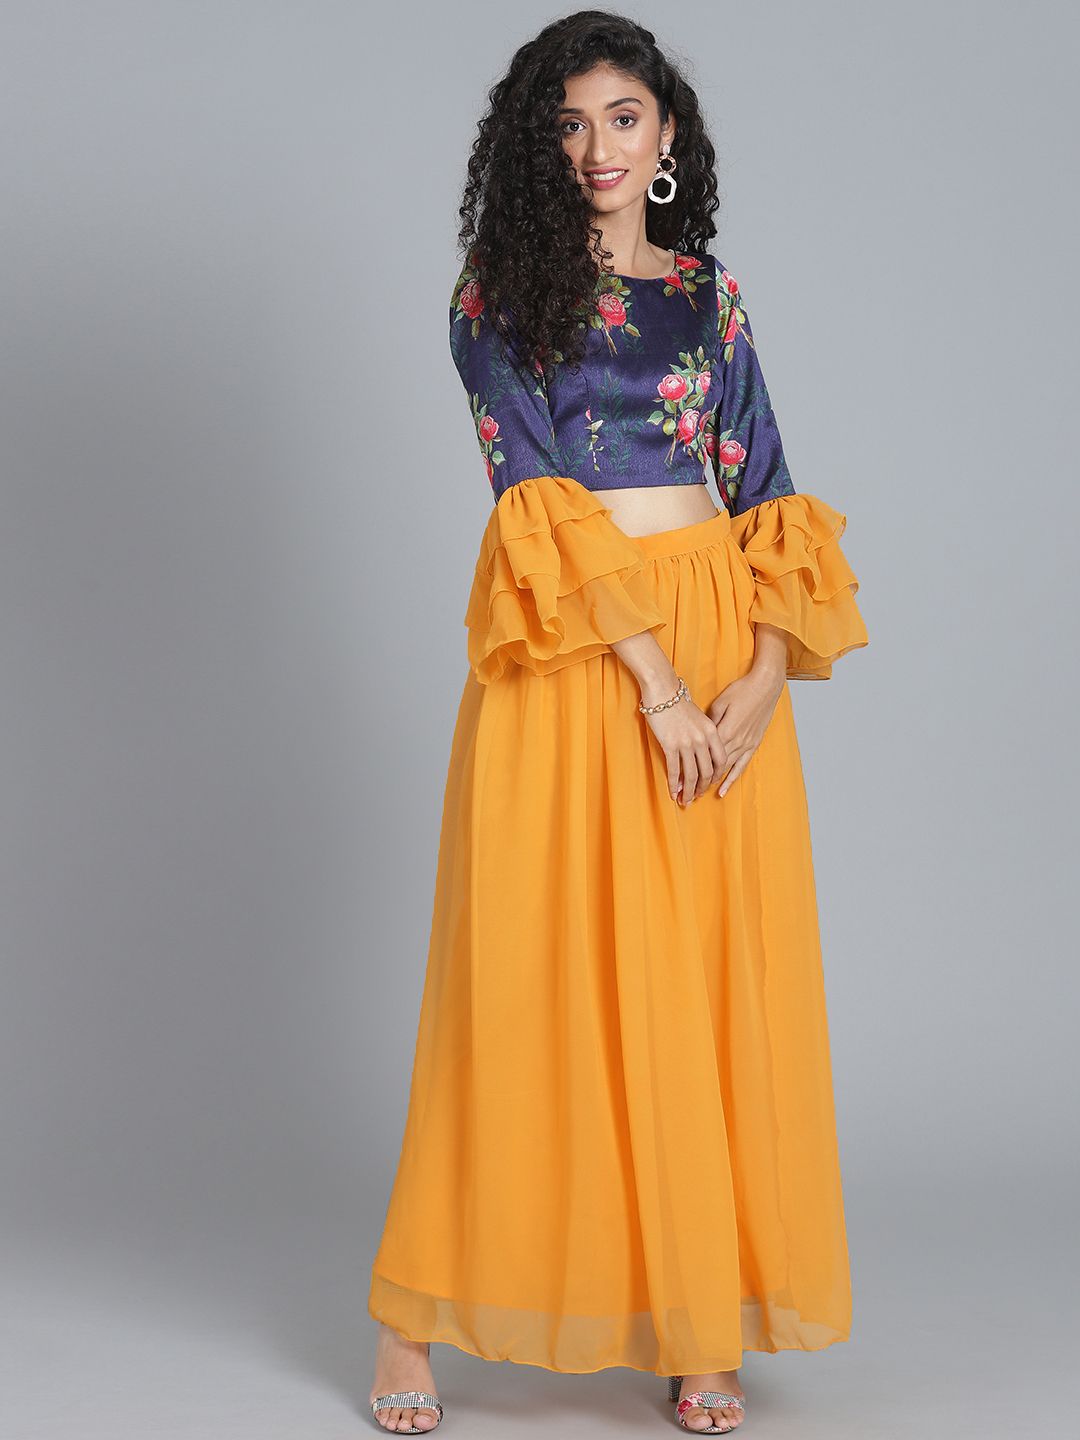 EthnoVogue Navy Blue & Mustard Yellow Made to Measure Printed Lehenga with Blouse Price in India